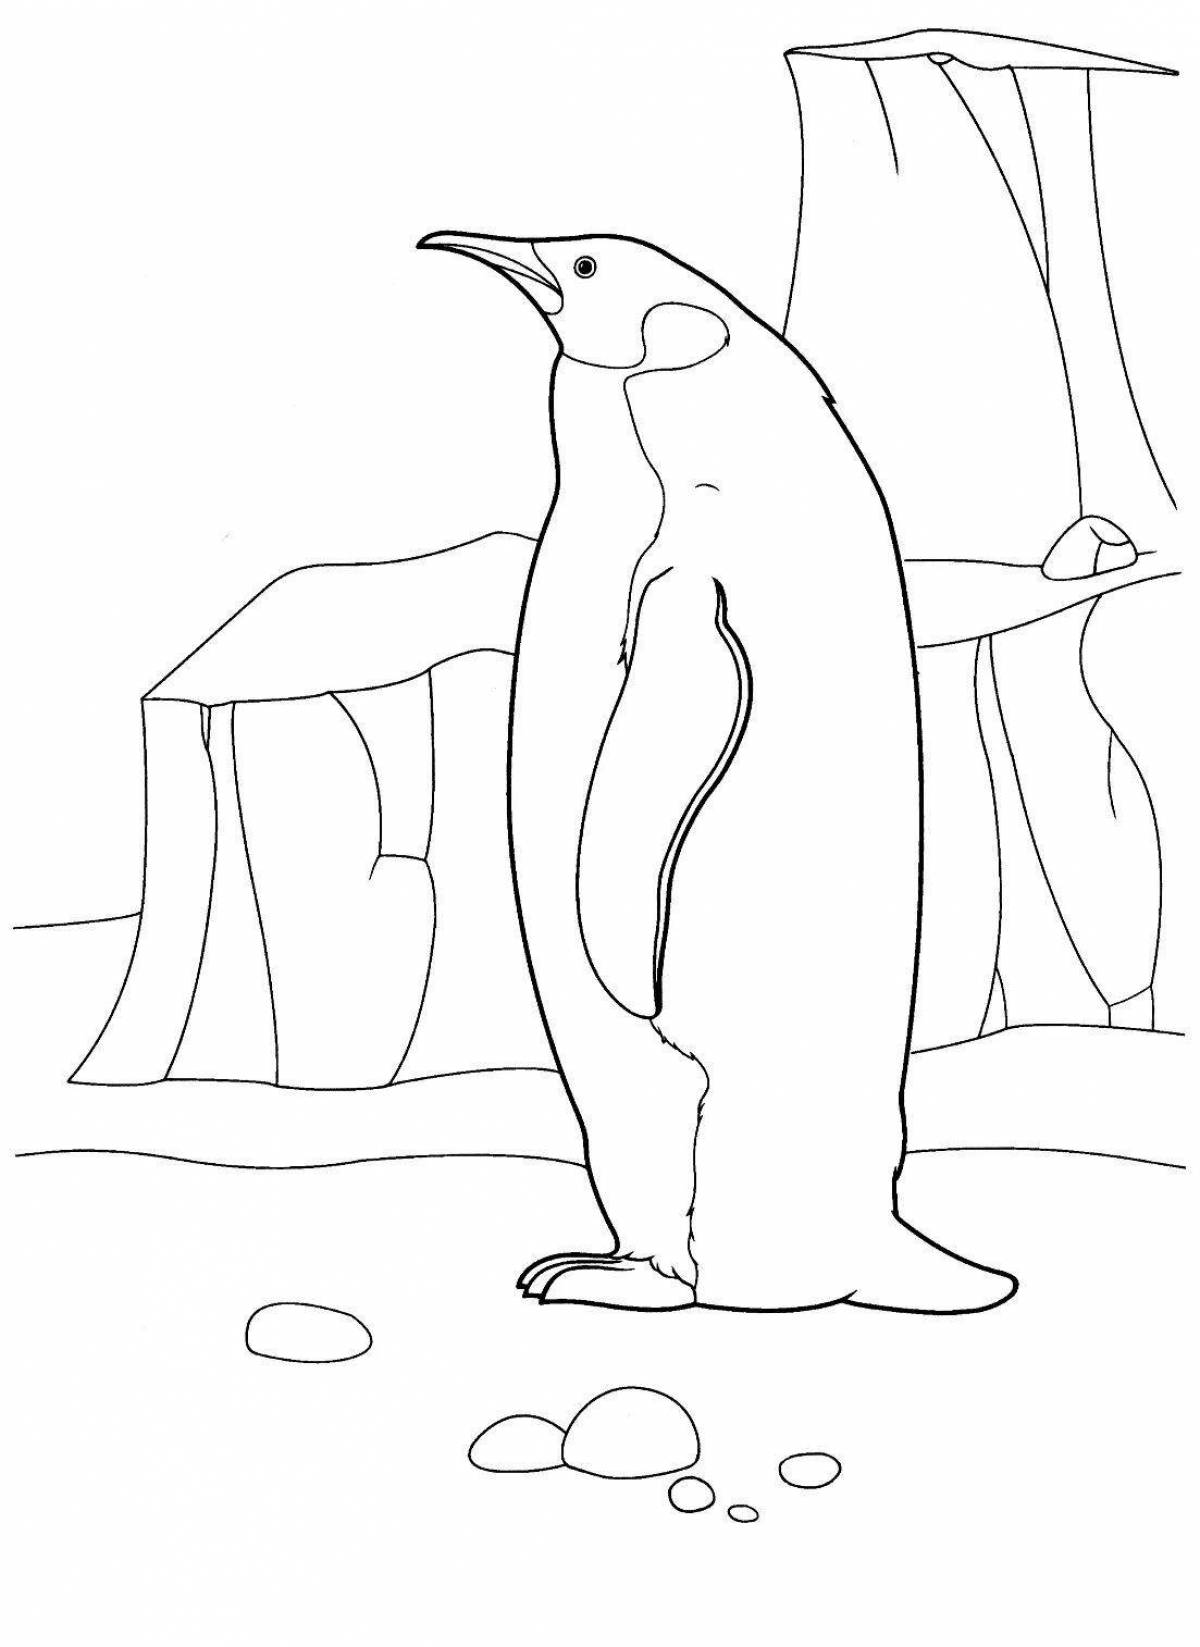 Exquisite penguin on an ice floe coloring pages for children